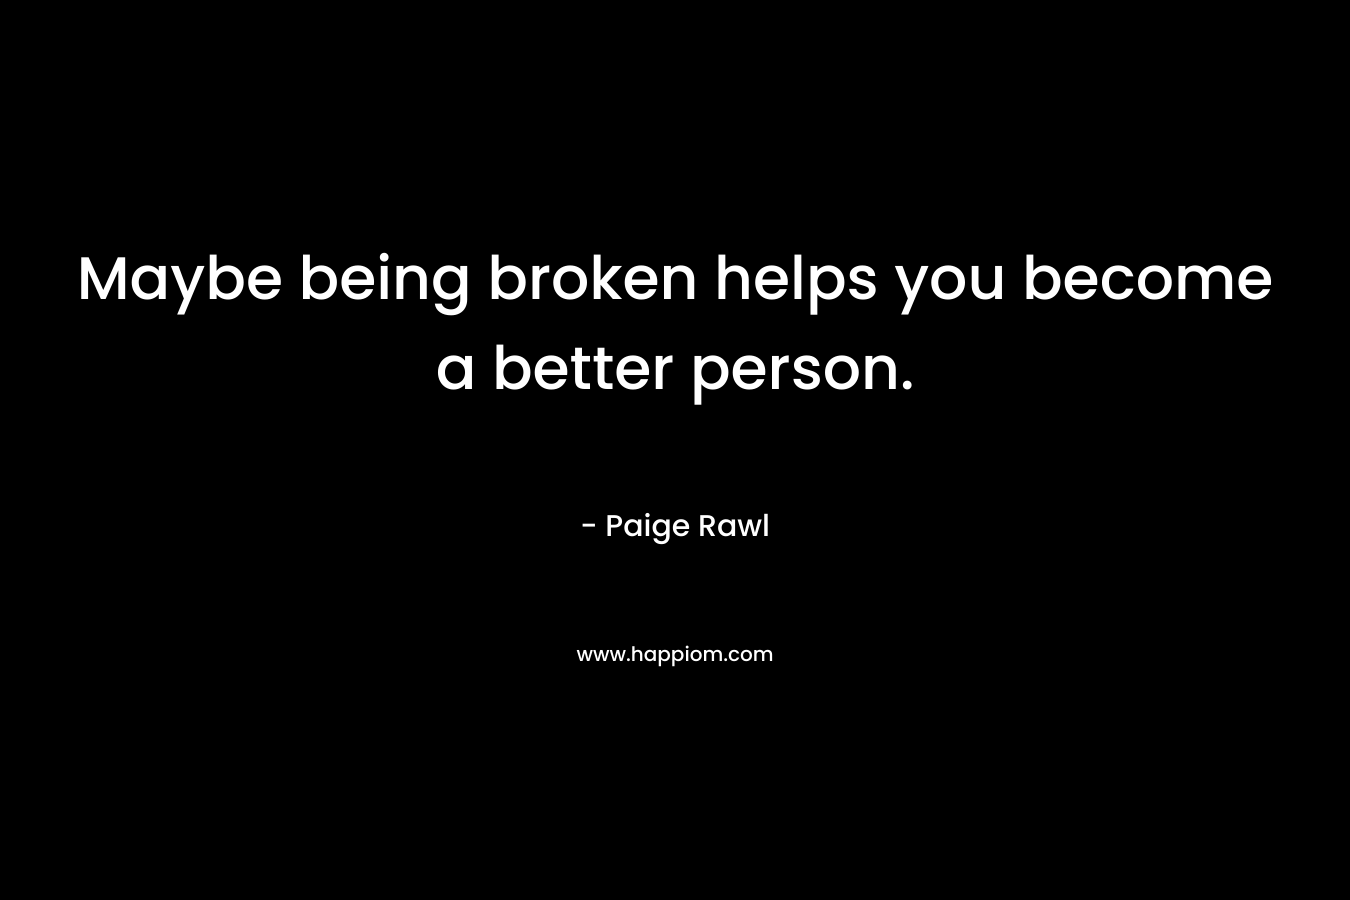 Maybe being broken helps you become a better person. – Paige Rawl